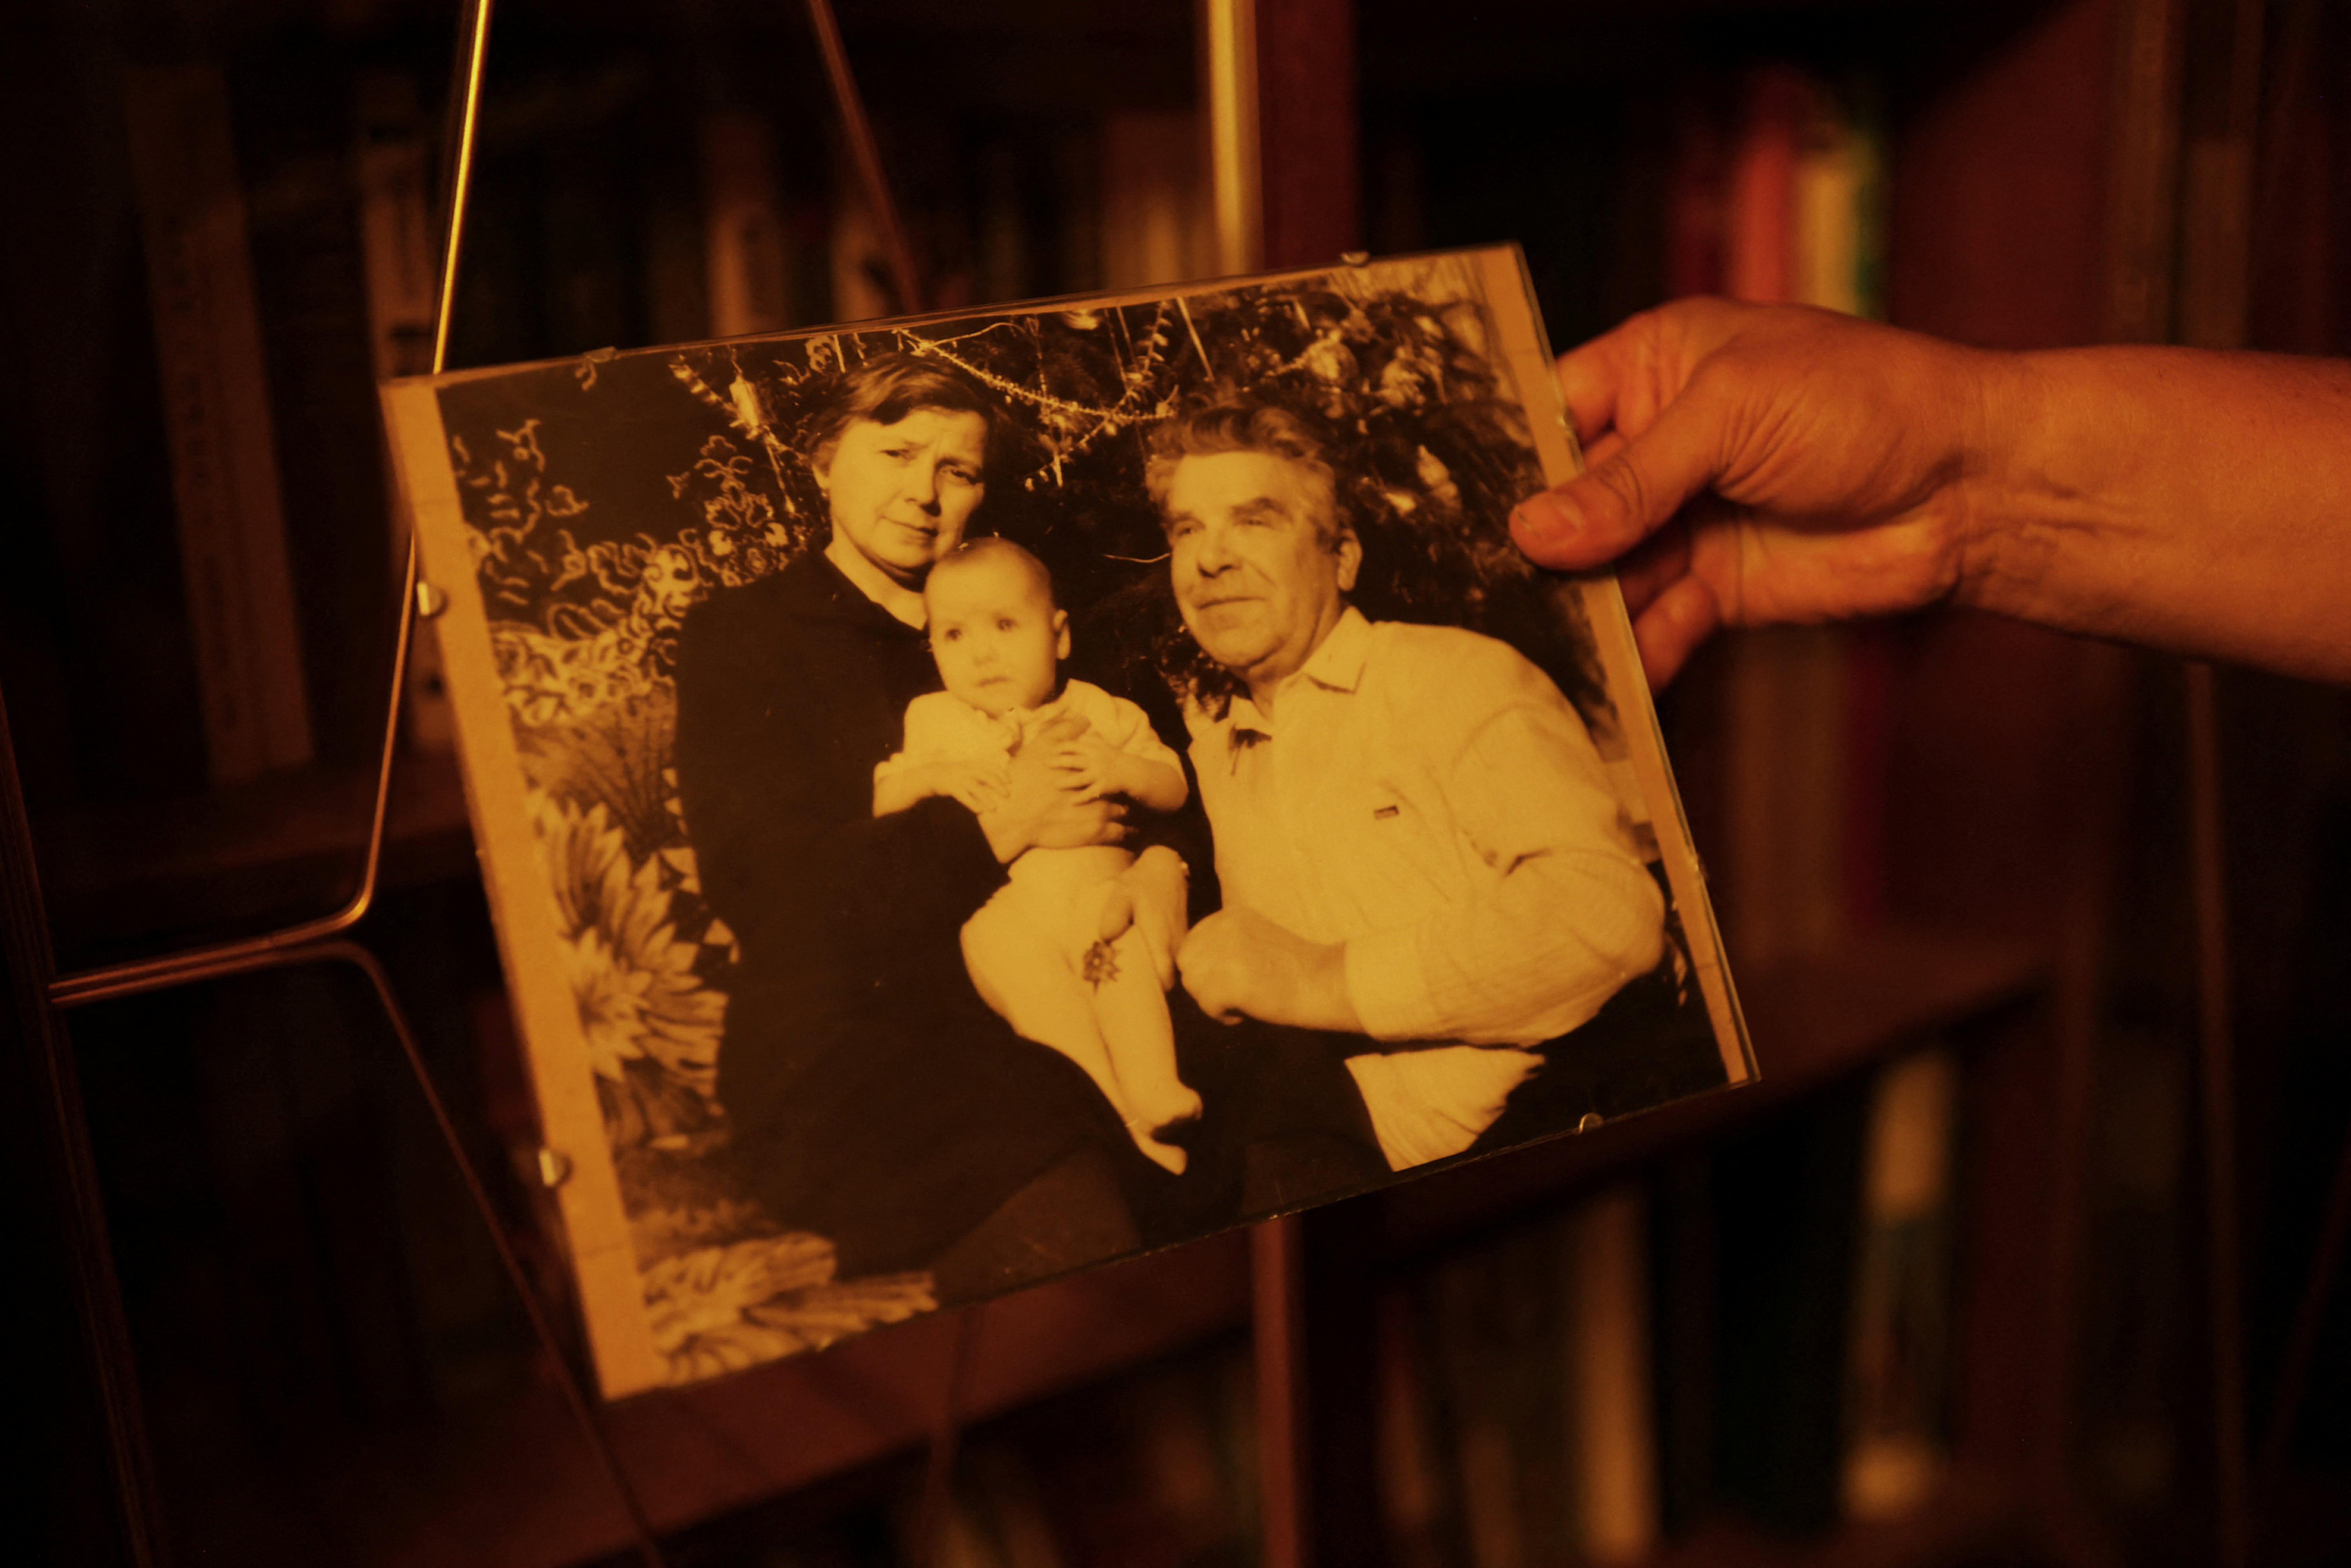 Fedor holds a photo of his wife Natalya as a baby with her parents Maria, and her late father, Vasilii